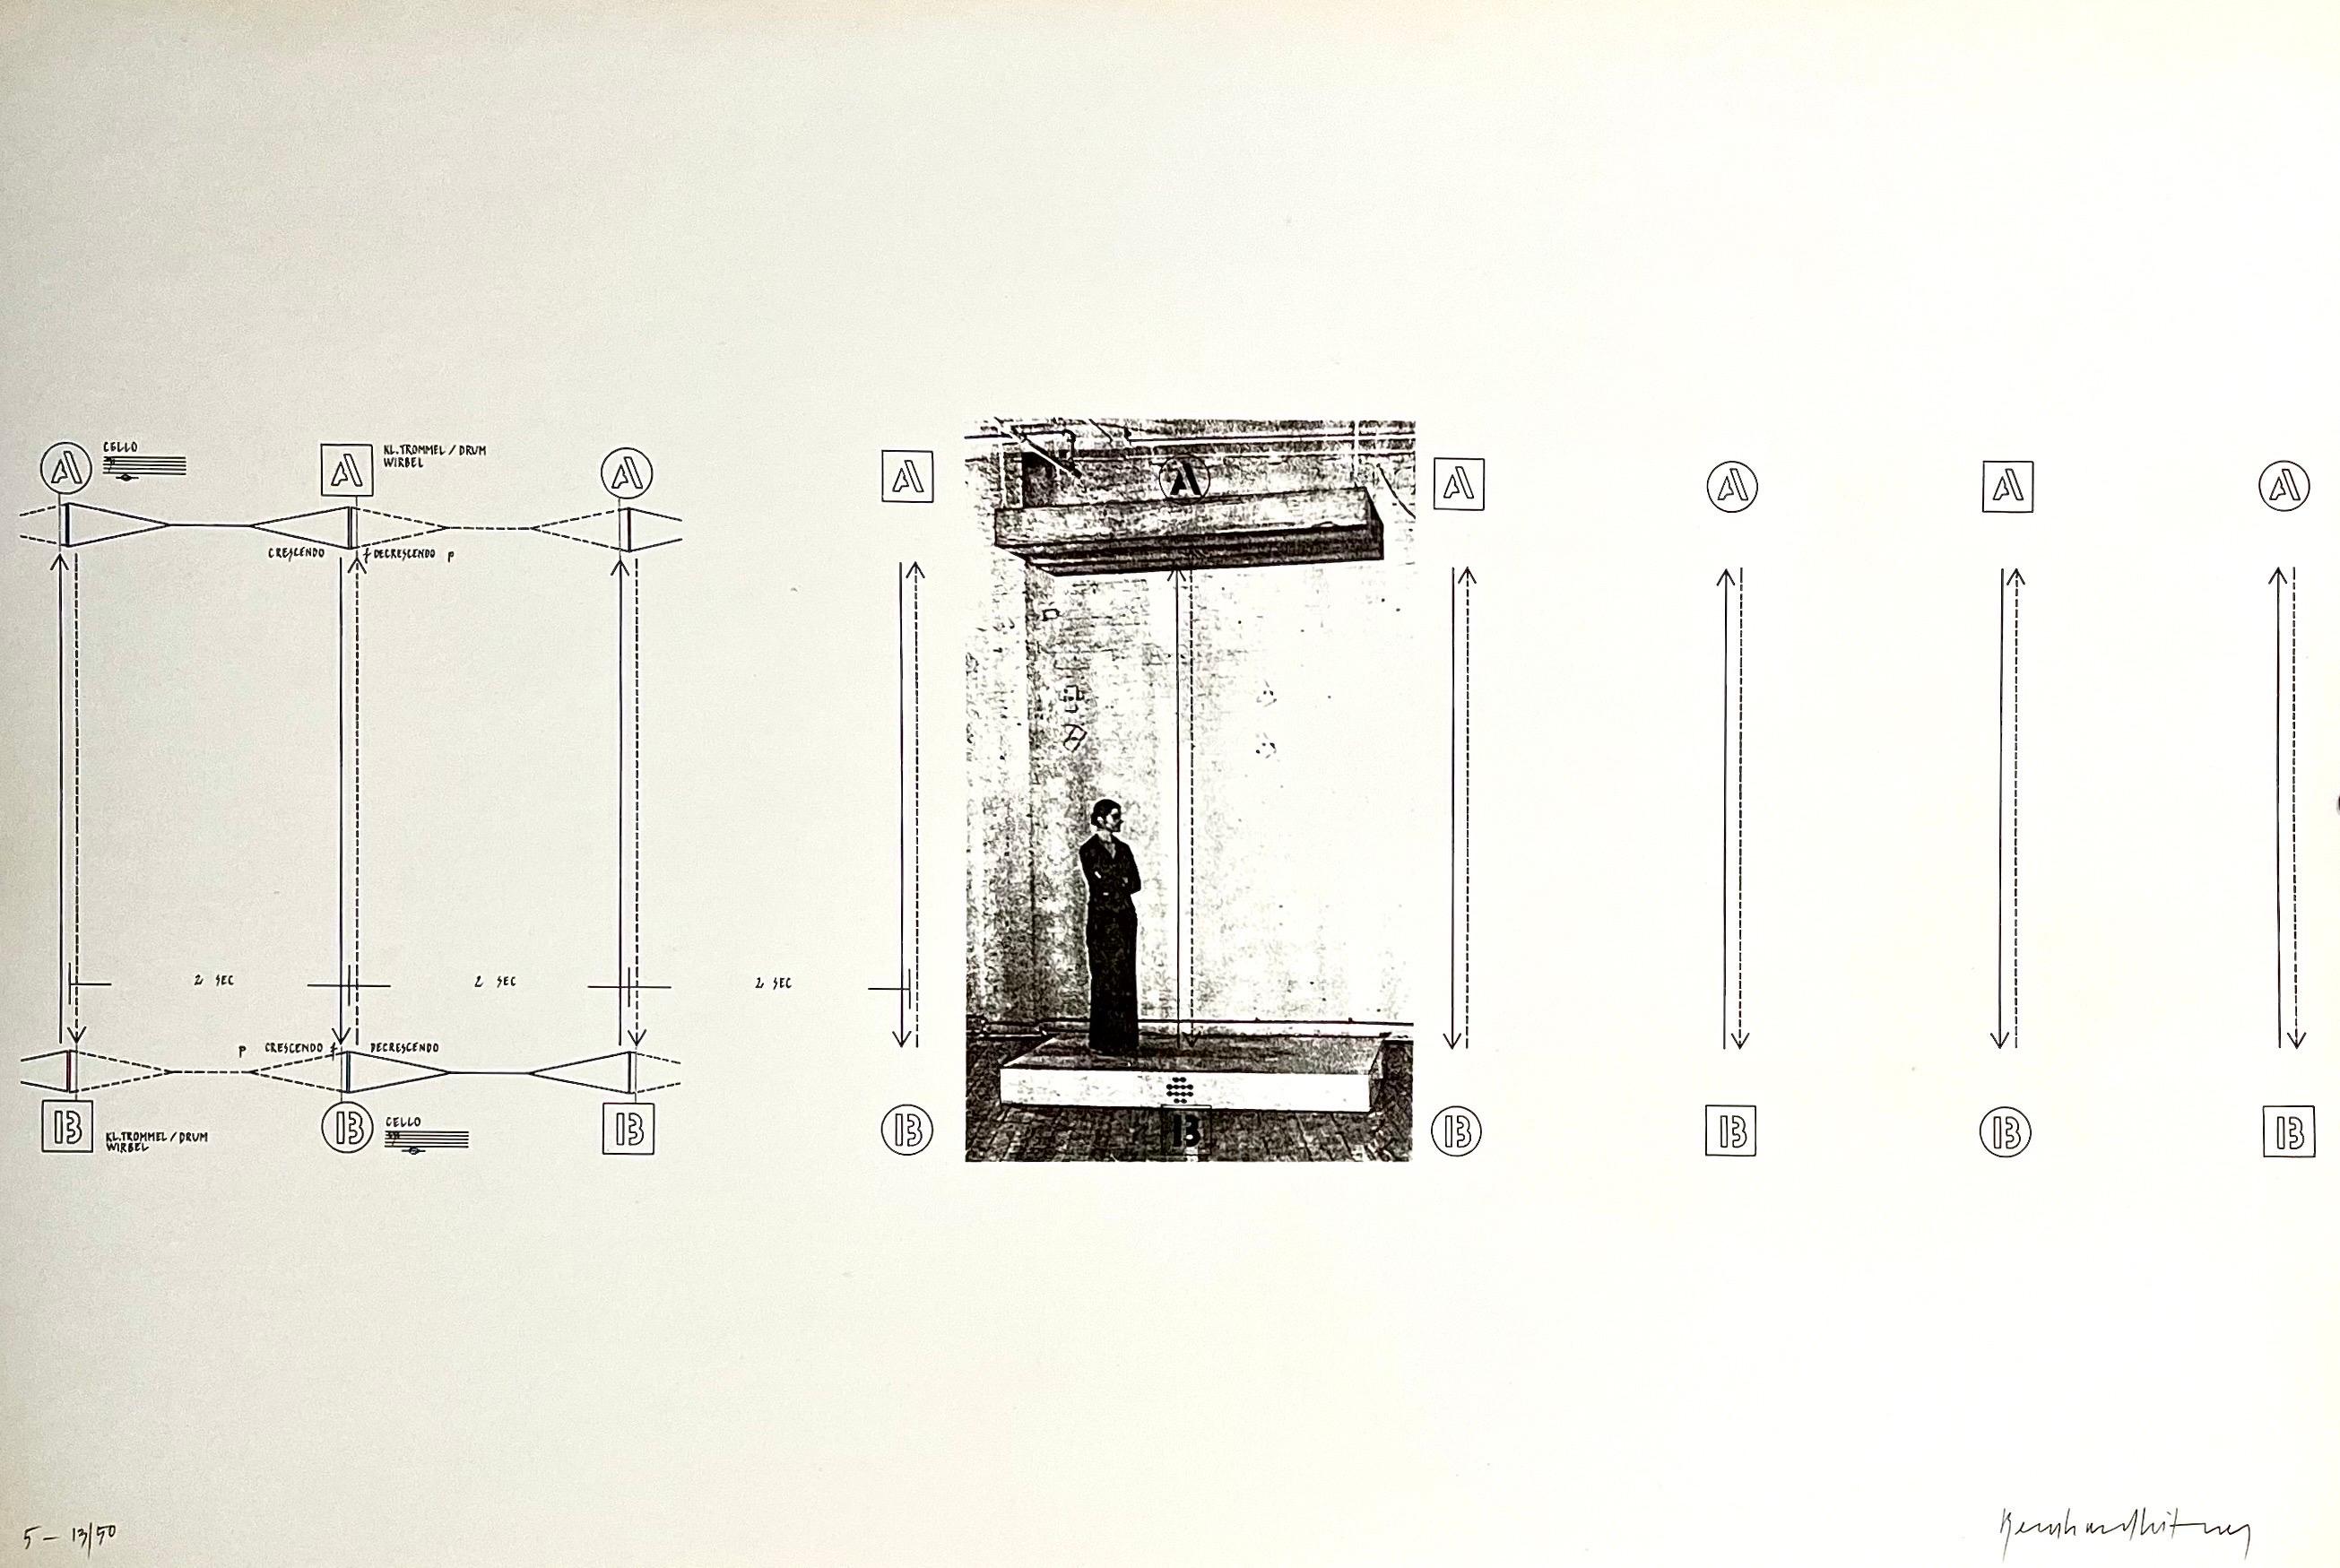 Bernhard Leitner, (Austrian, 1938) 
From a portfolio "Sound : Space"  "Ton : Raum"
Self published by artist in 1975/1976, 
Limited edition of 50
Hand signed in pencil by artist.

According to his gallery it is a photomechanical litho etching